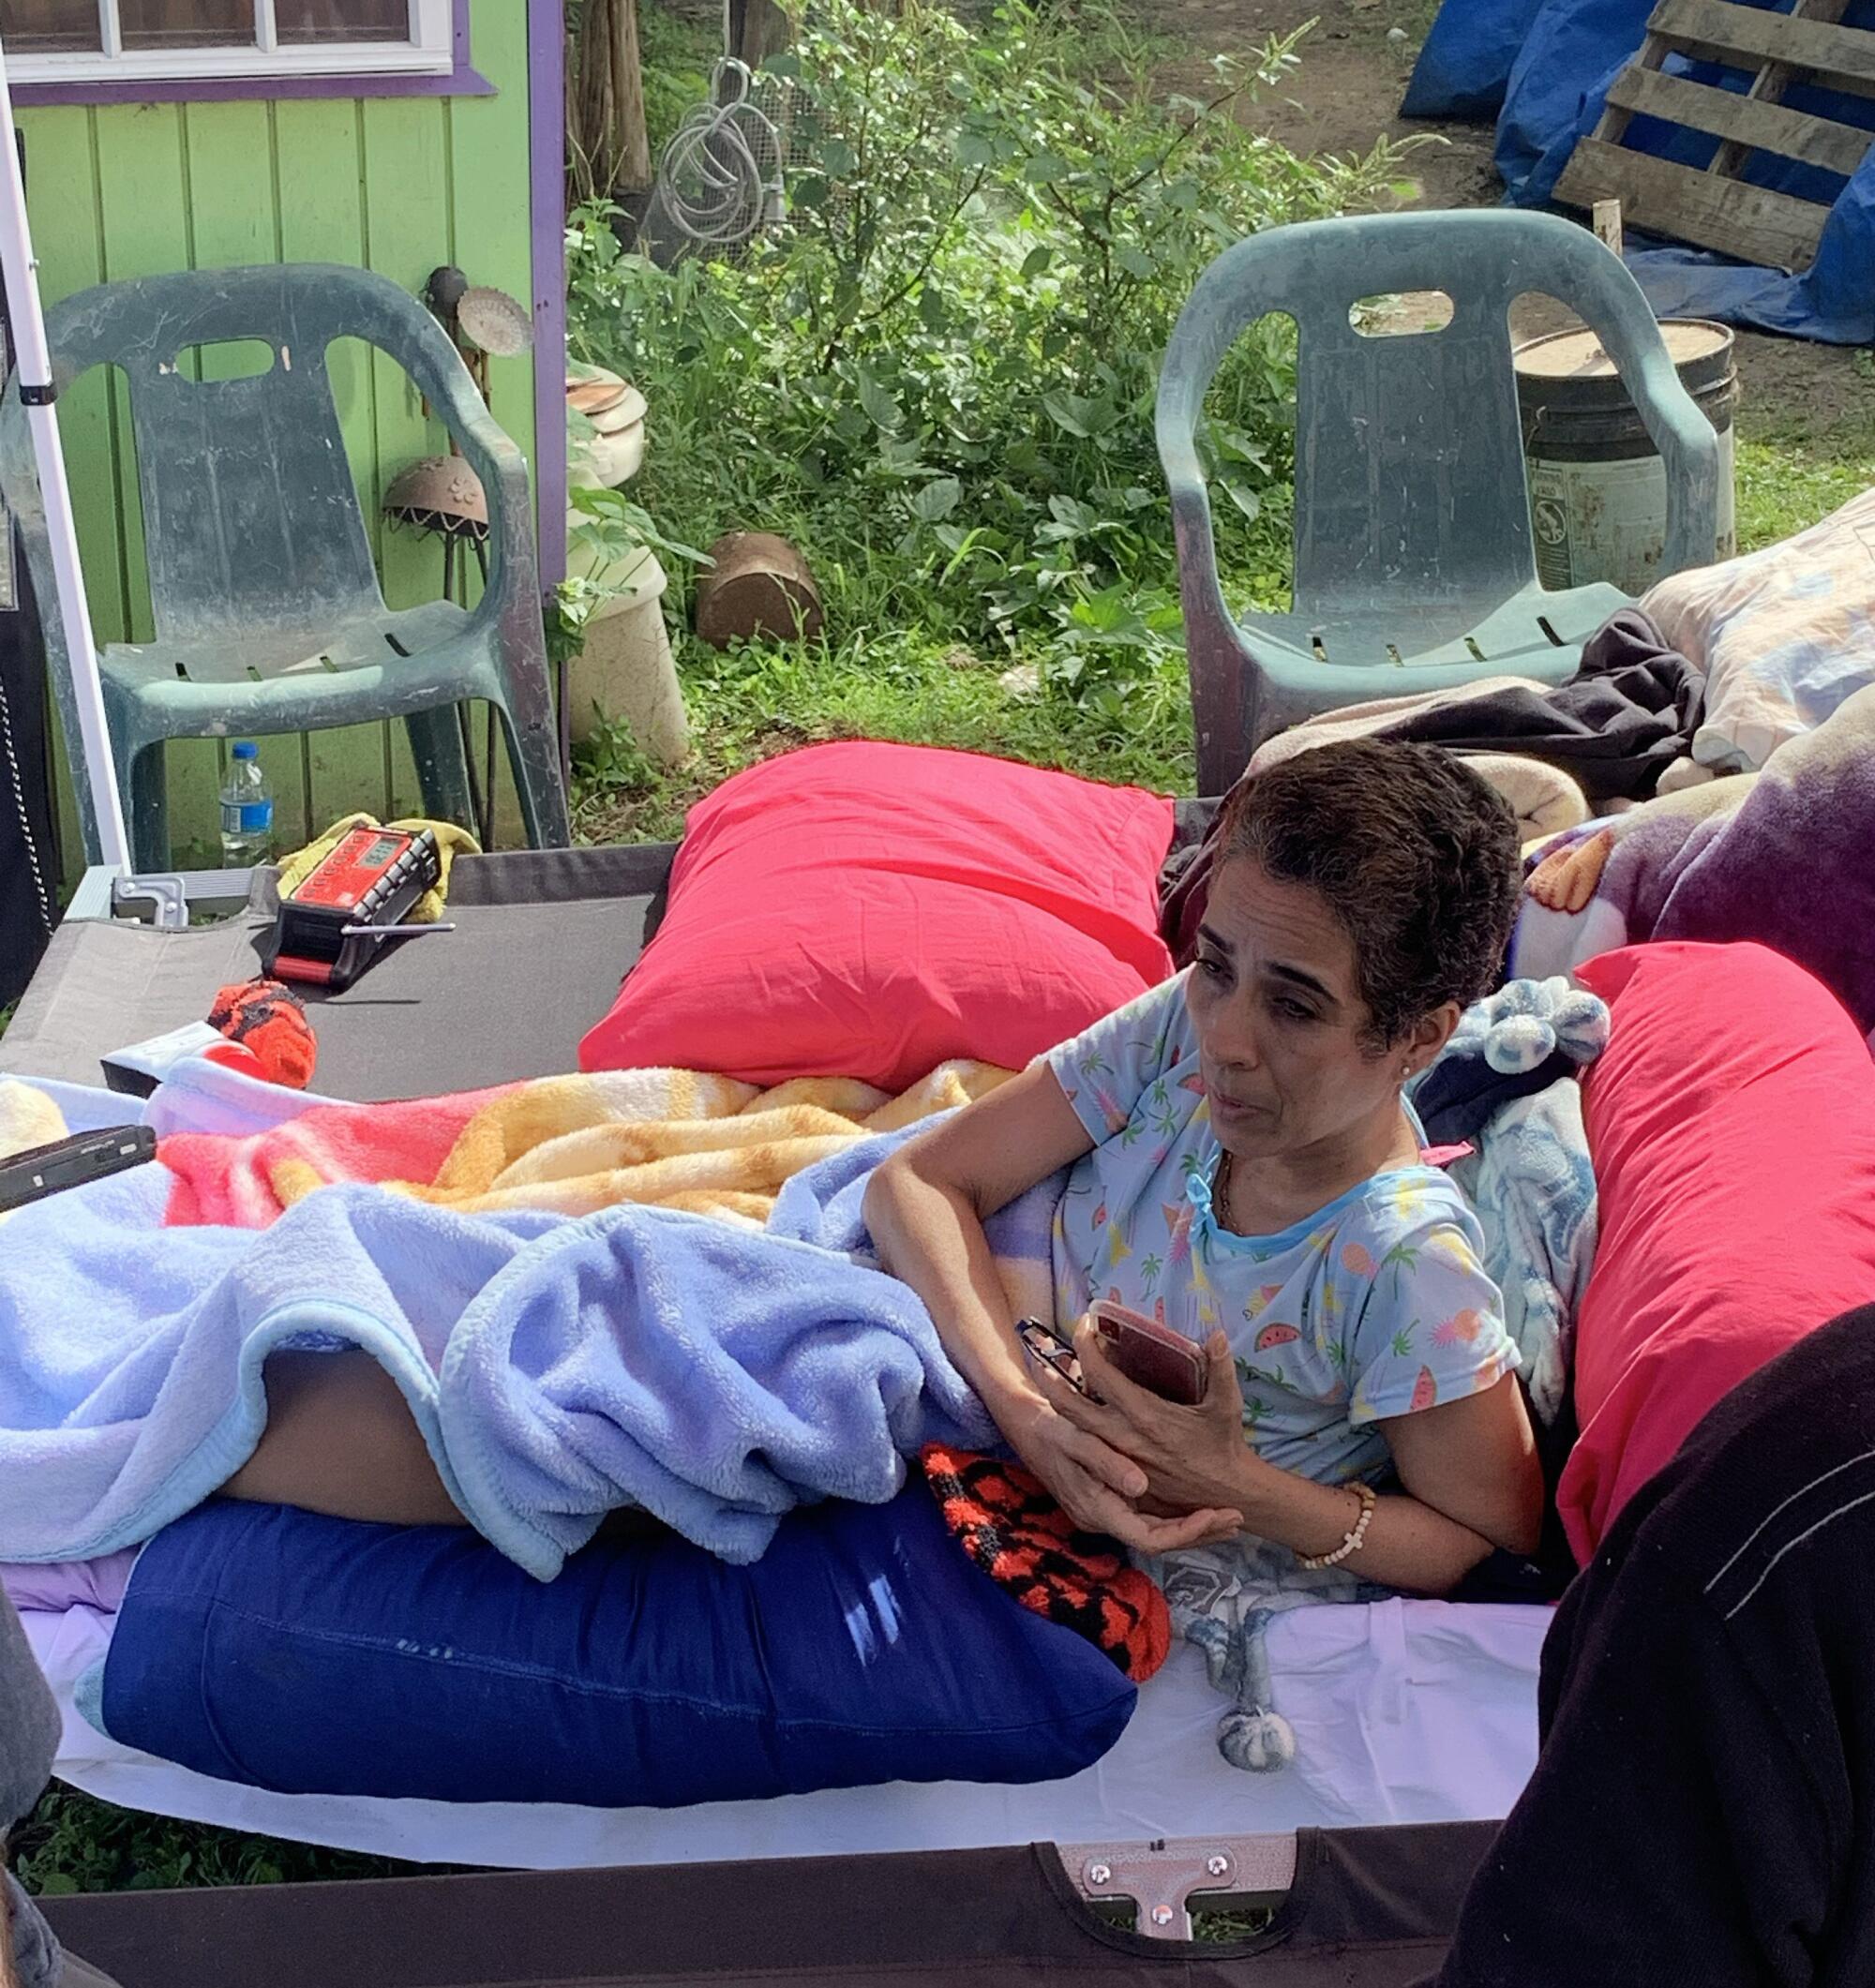 Marianela González Cintrón, who is bedridden with cancer, has a cot set up an area outside her home in Guayanilla, Puerto Rico, following the earthquakes.